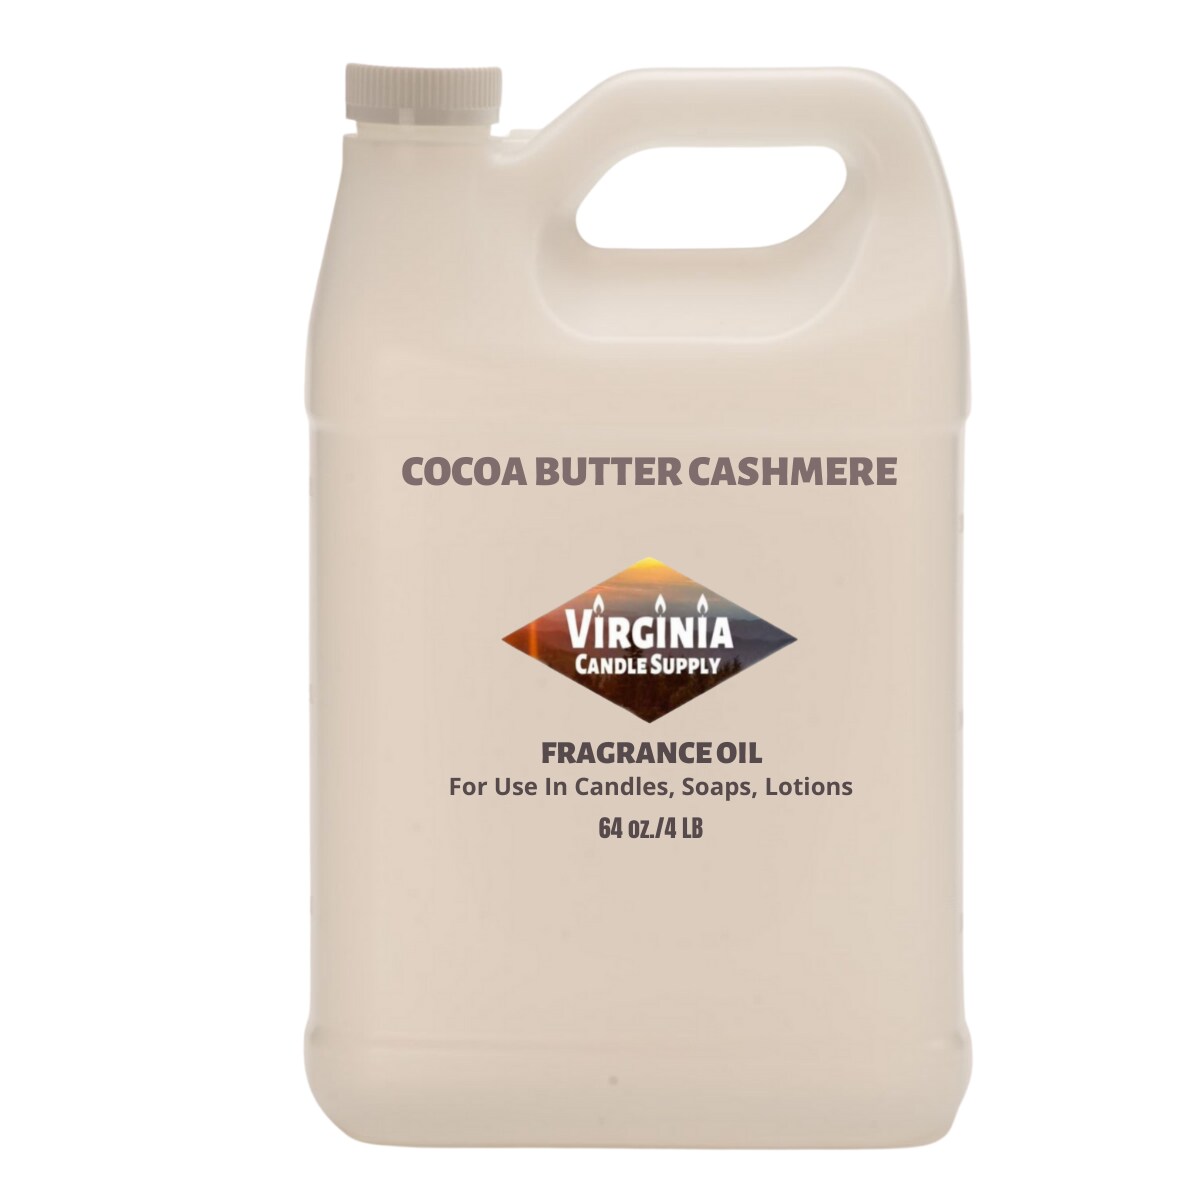 Cocoa Butter Cashmere Fragrance Oil (Our Version of the Brand Name